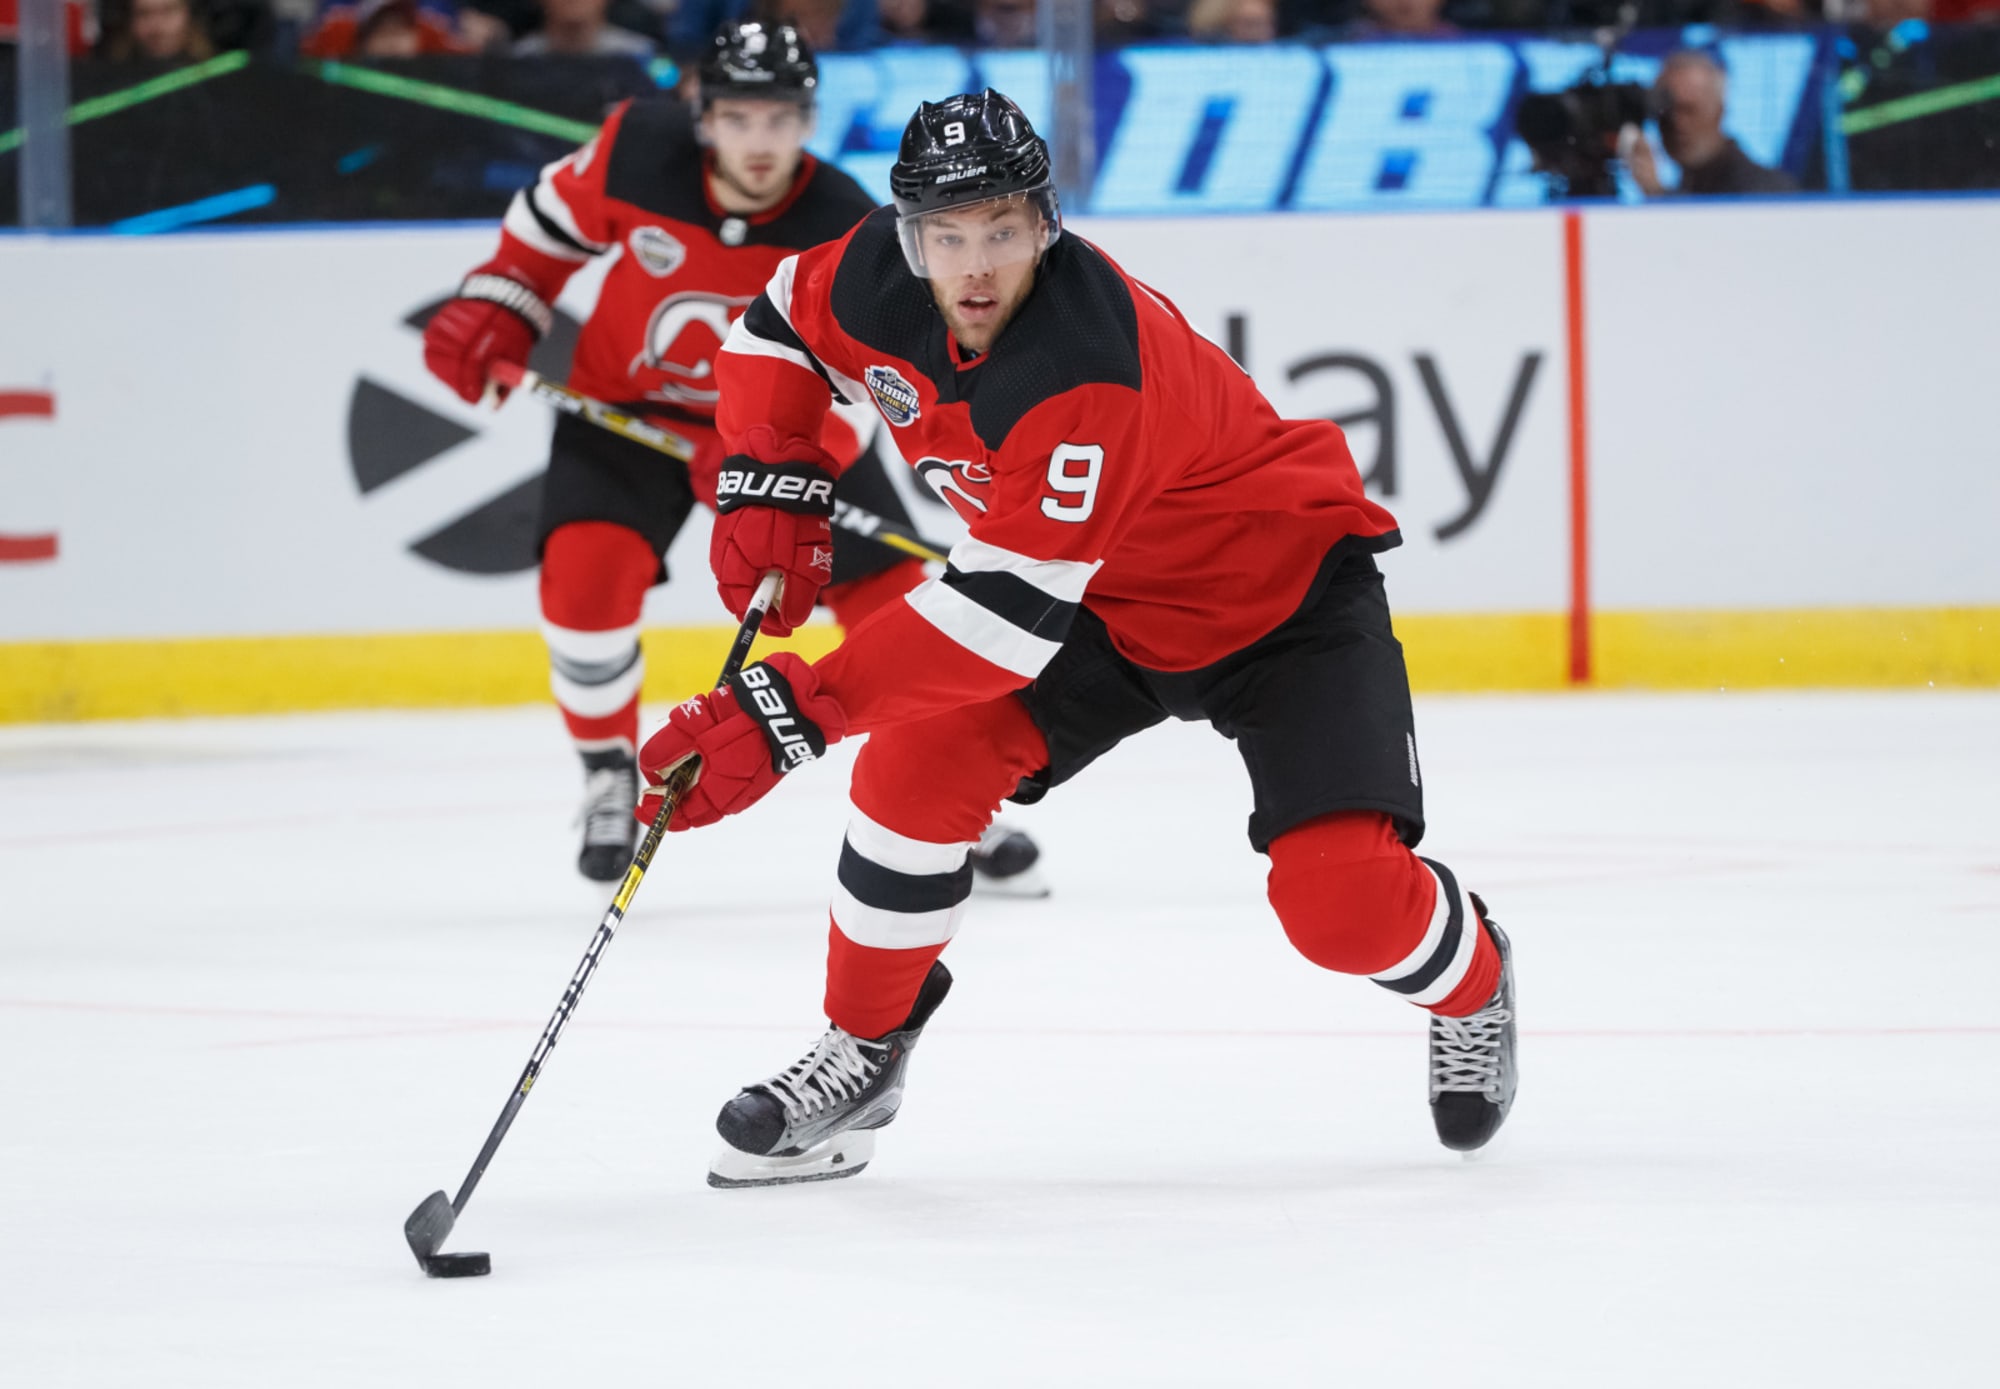 Edmonton Oilers: Should they bring back Taylor Hall in any capacity?